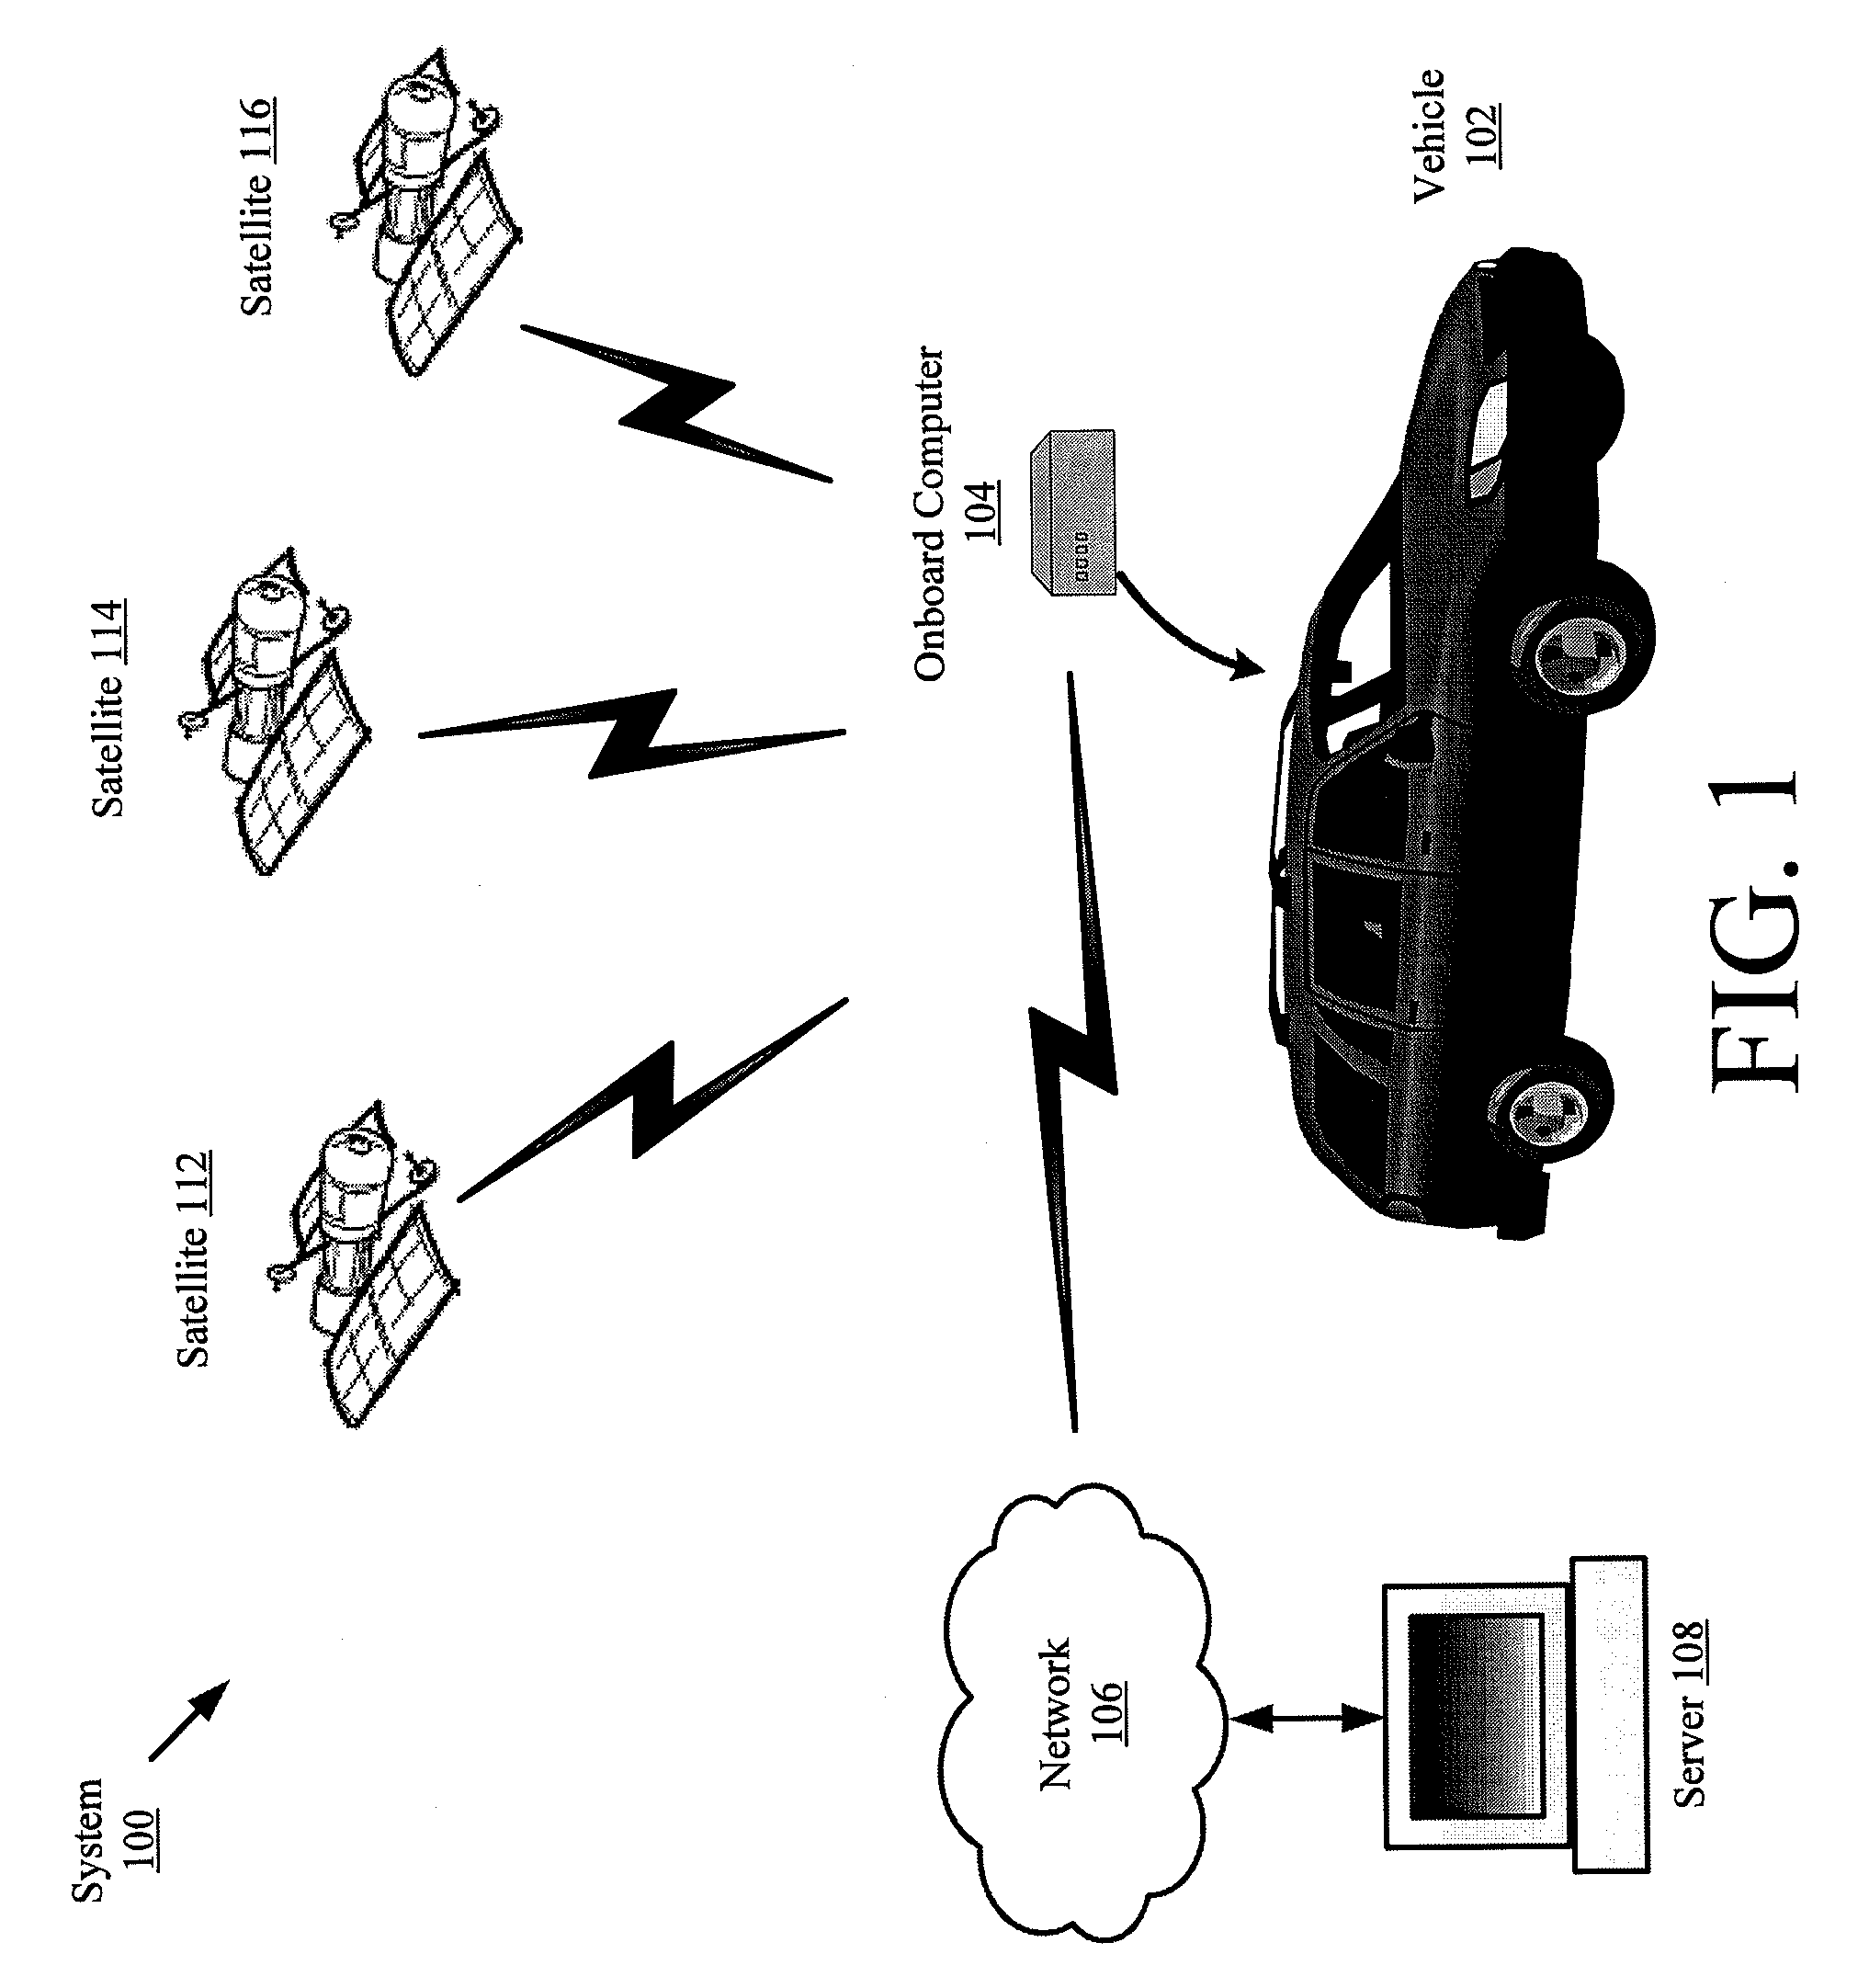 Systems and methods for monitoring and reporting road quality